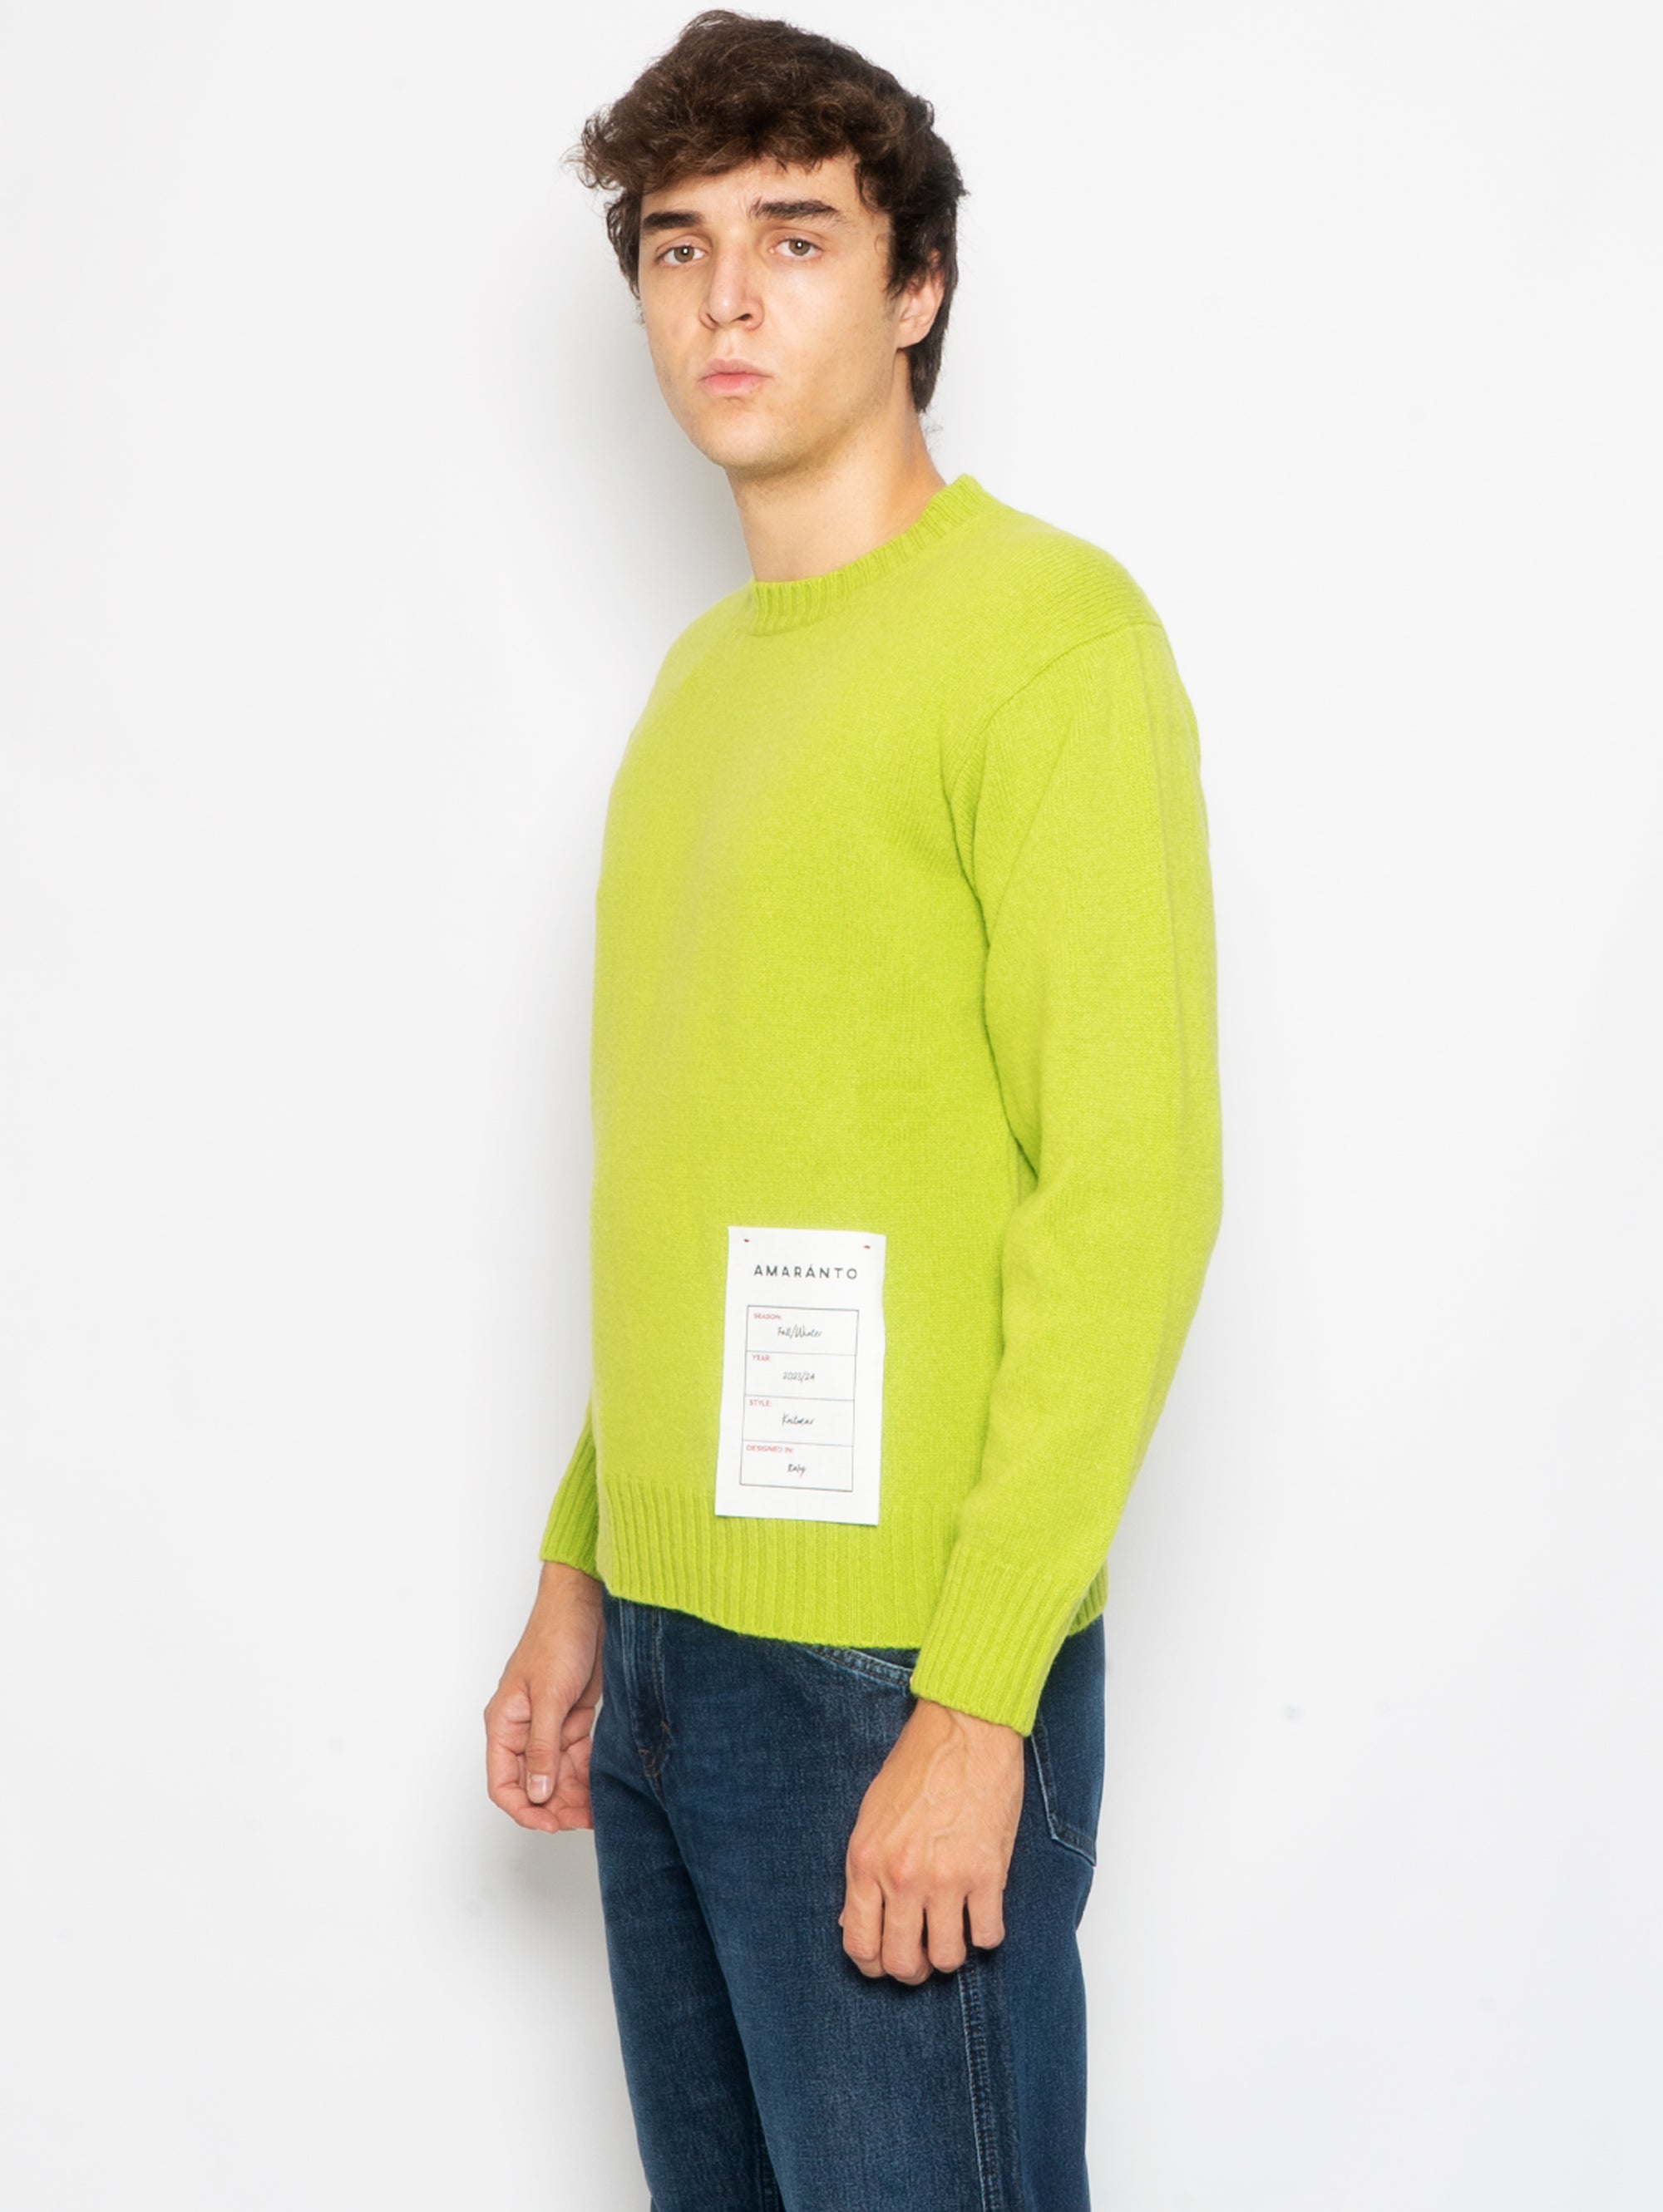 Green Wool and Cashmere Crewneck Sweater